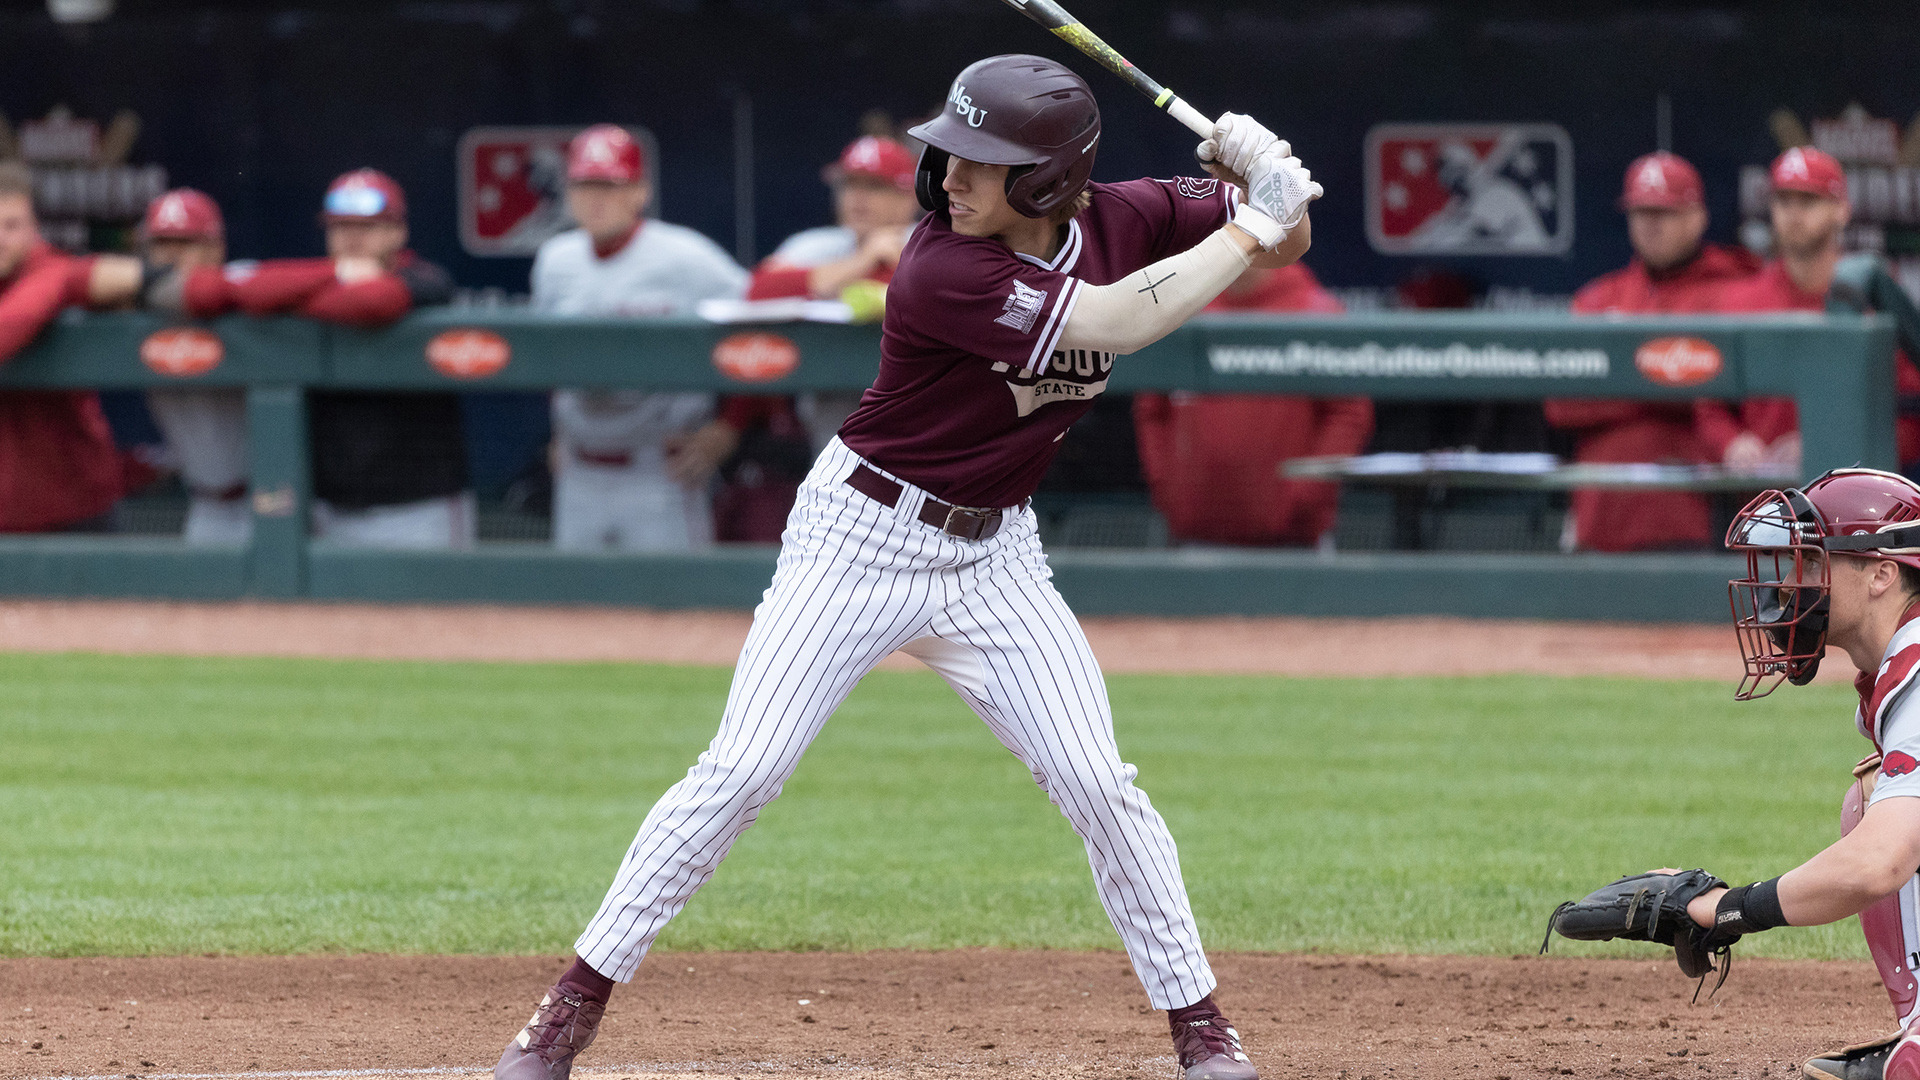 A baseball player in a Missouri State Bears uniform gets ready to hit the ball